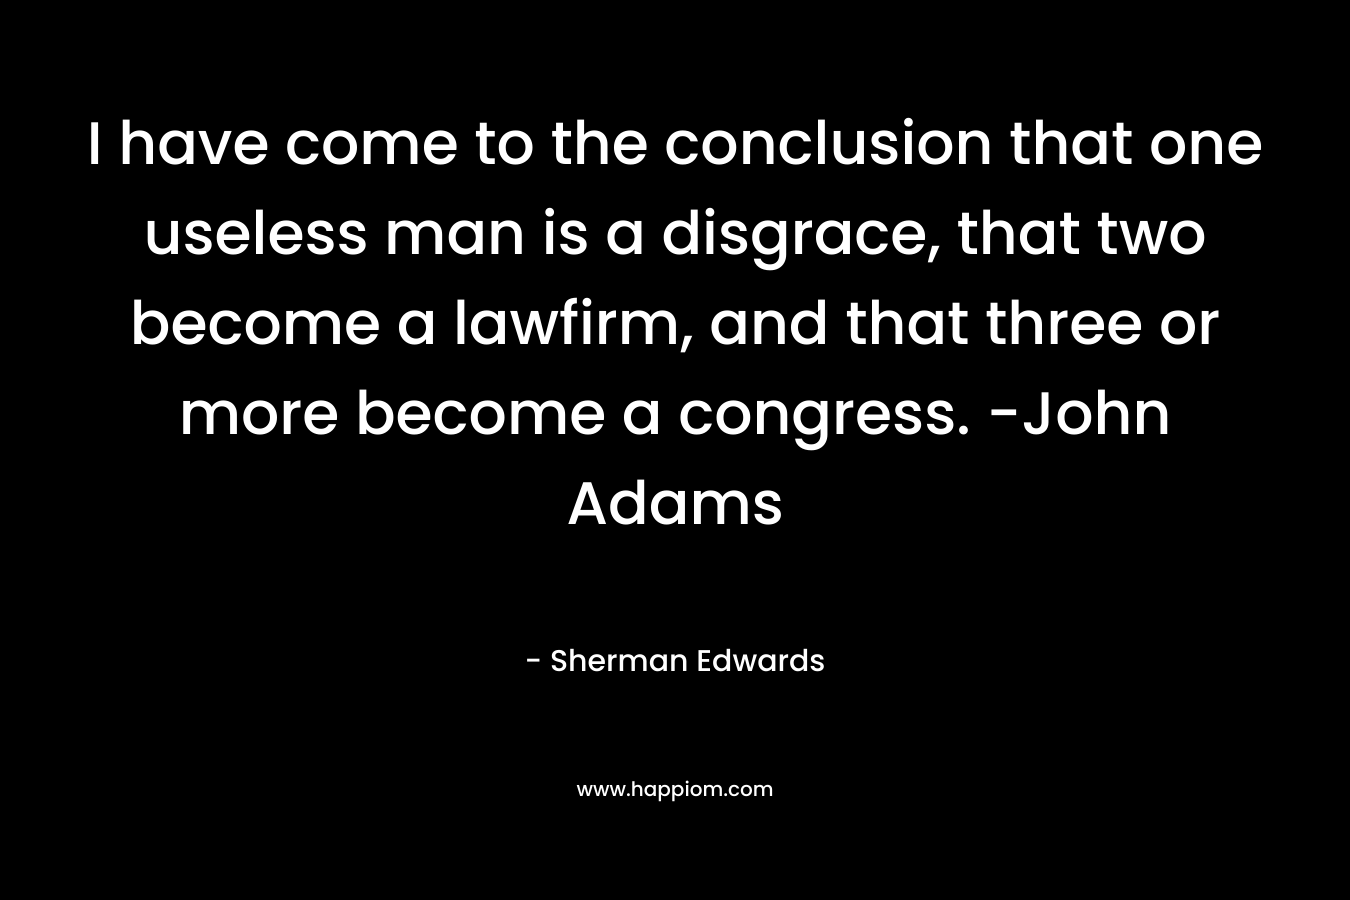 I have come to the conclusion that one useless man is a disgrace, that two become a lawfirm, and that three or more become a congress. -John Adams